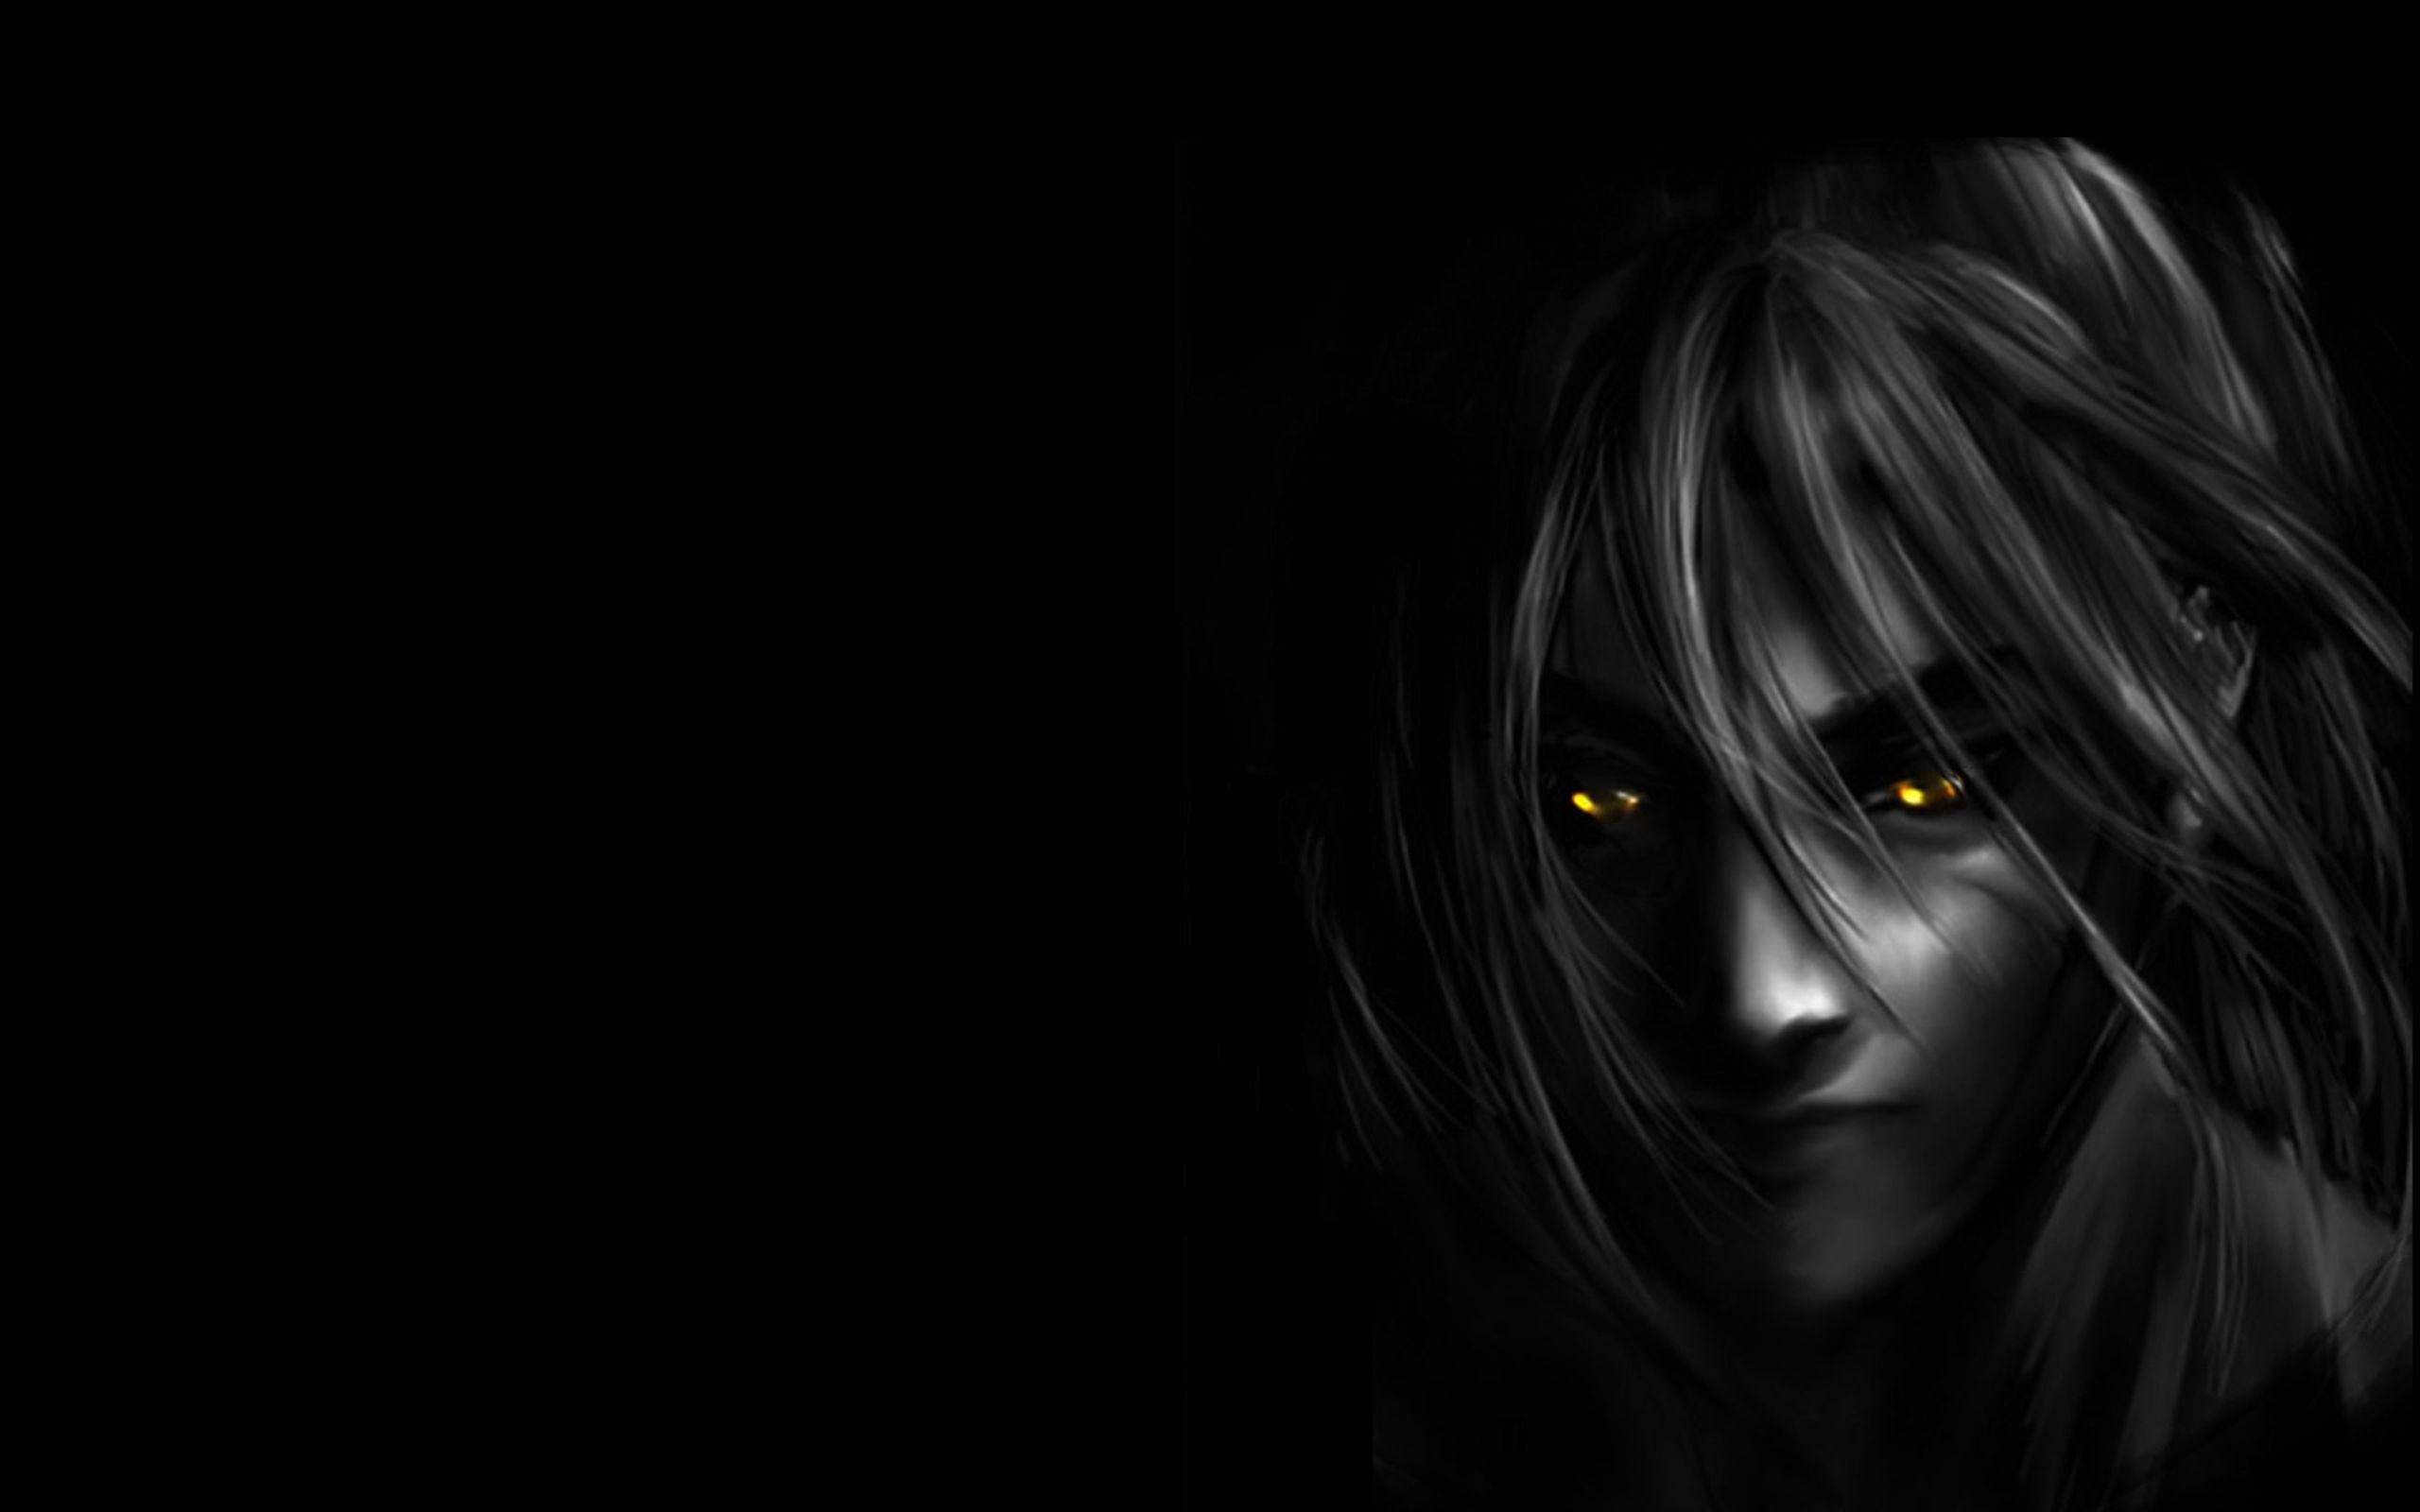 lost in the dark. My obsession for anime comes to surface <3